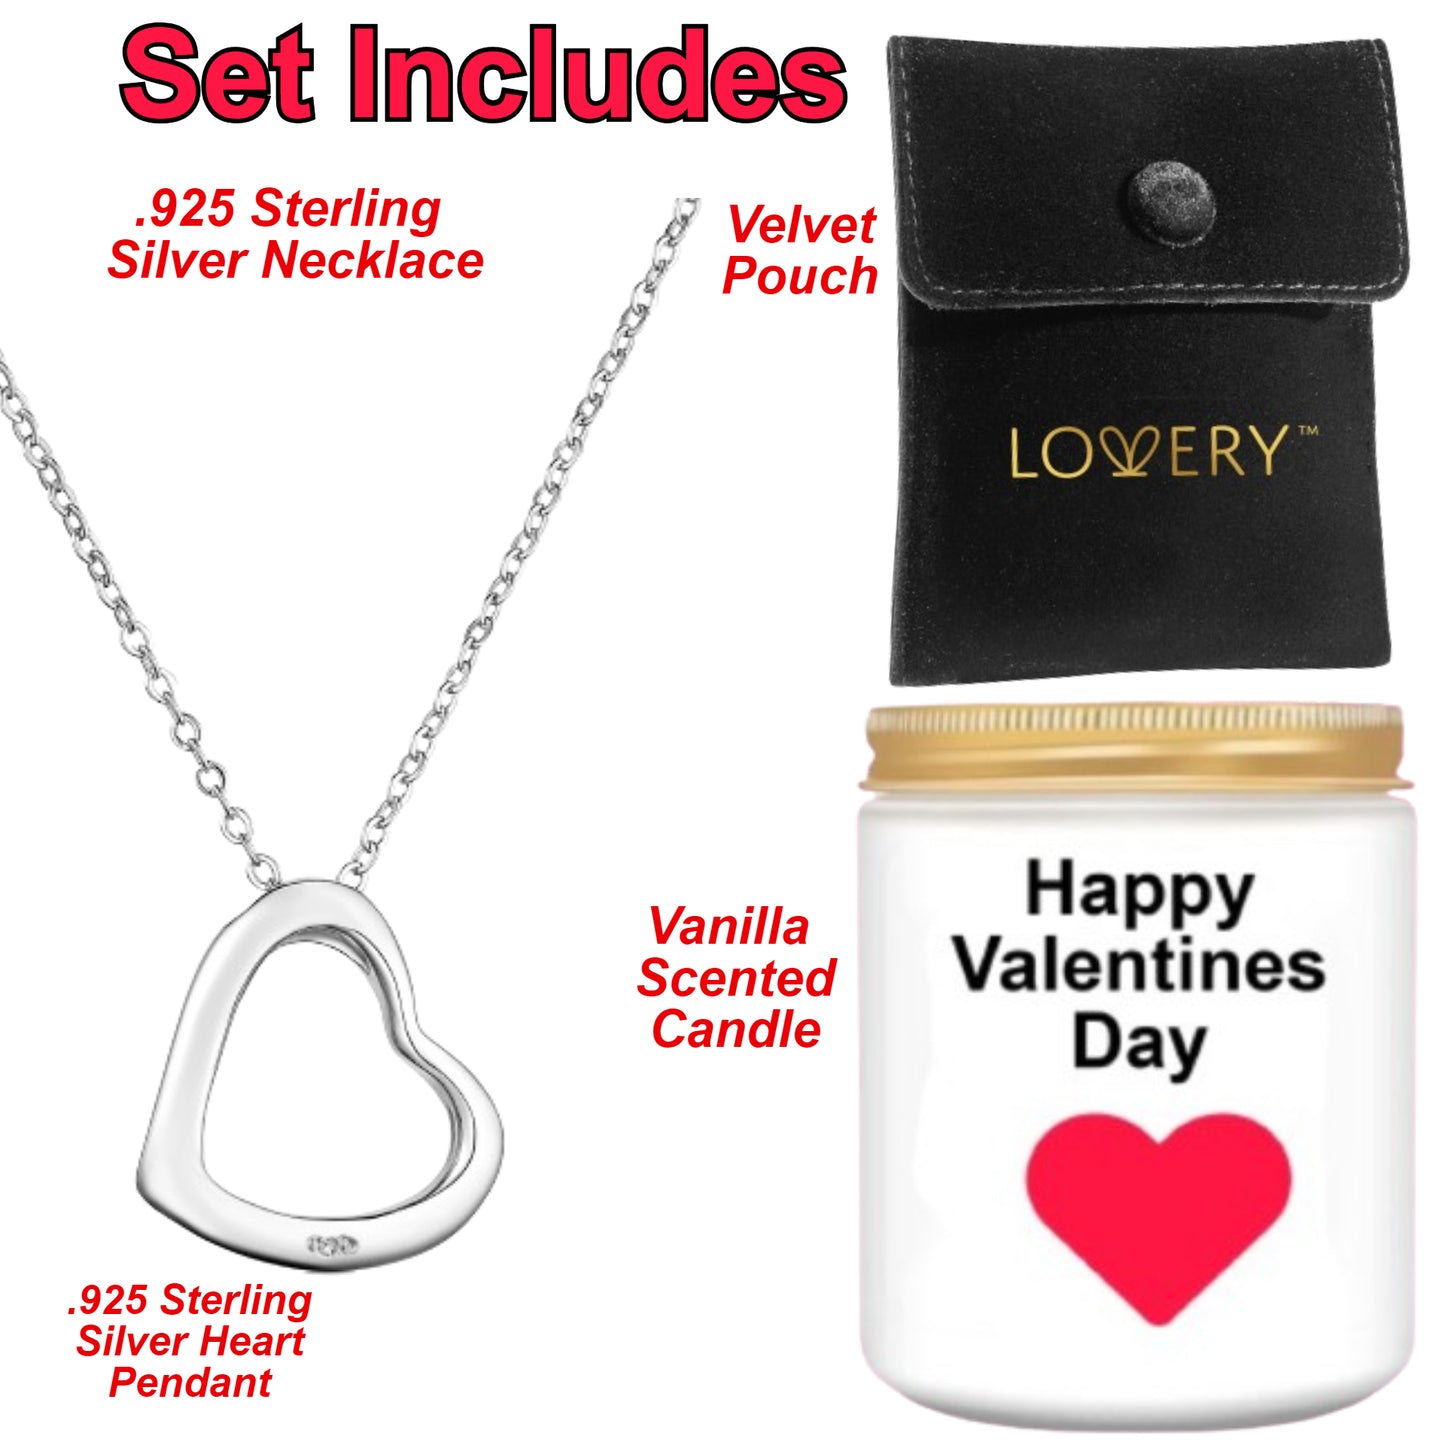 Valentines .925 Sterling Silver Heart Pendant Necklace with Pouch & Soy Candle